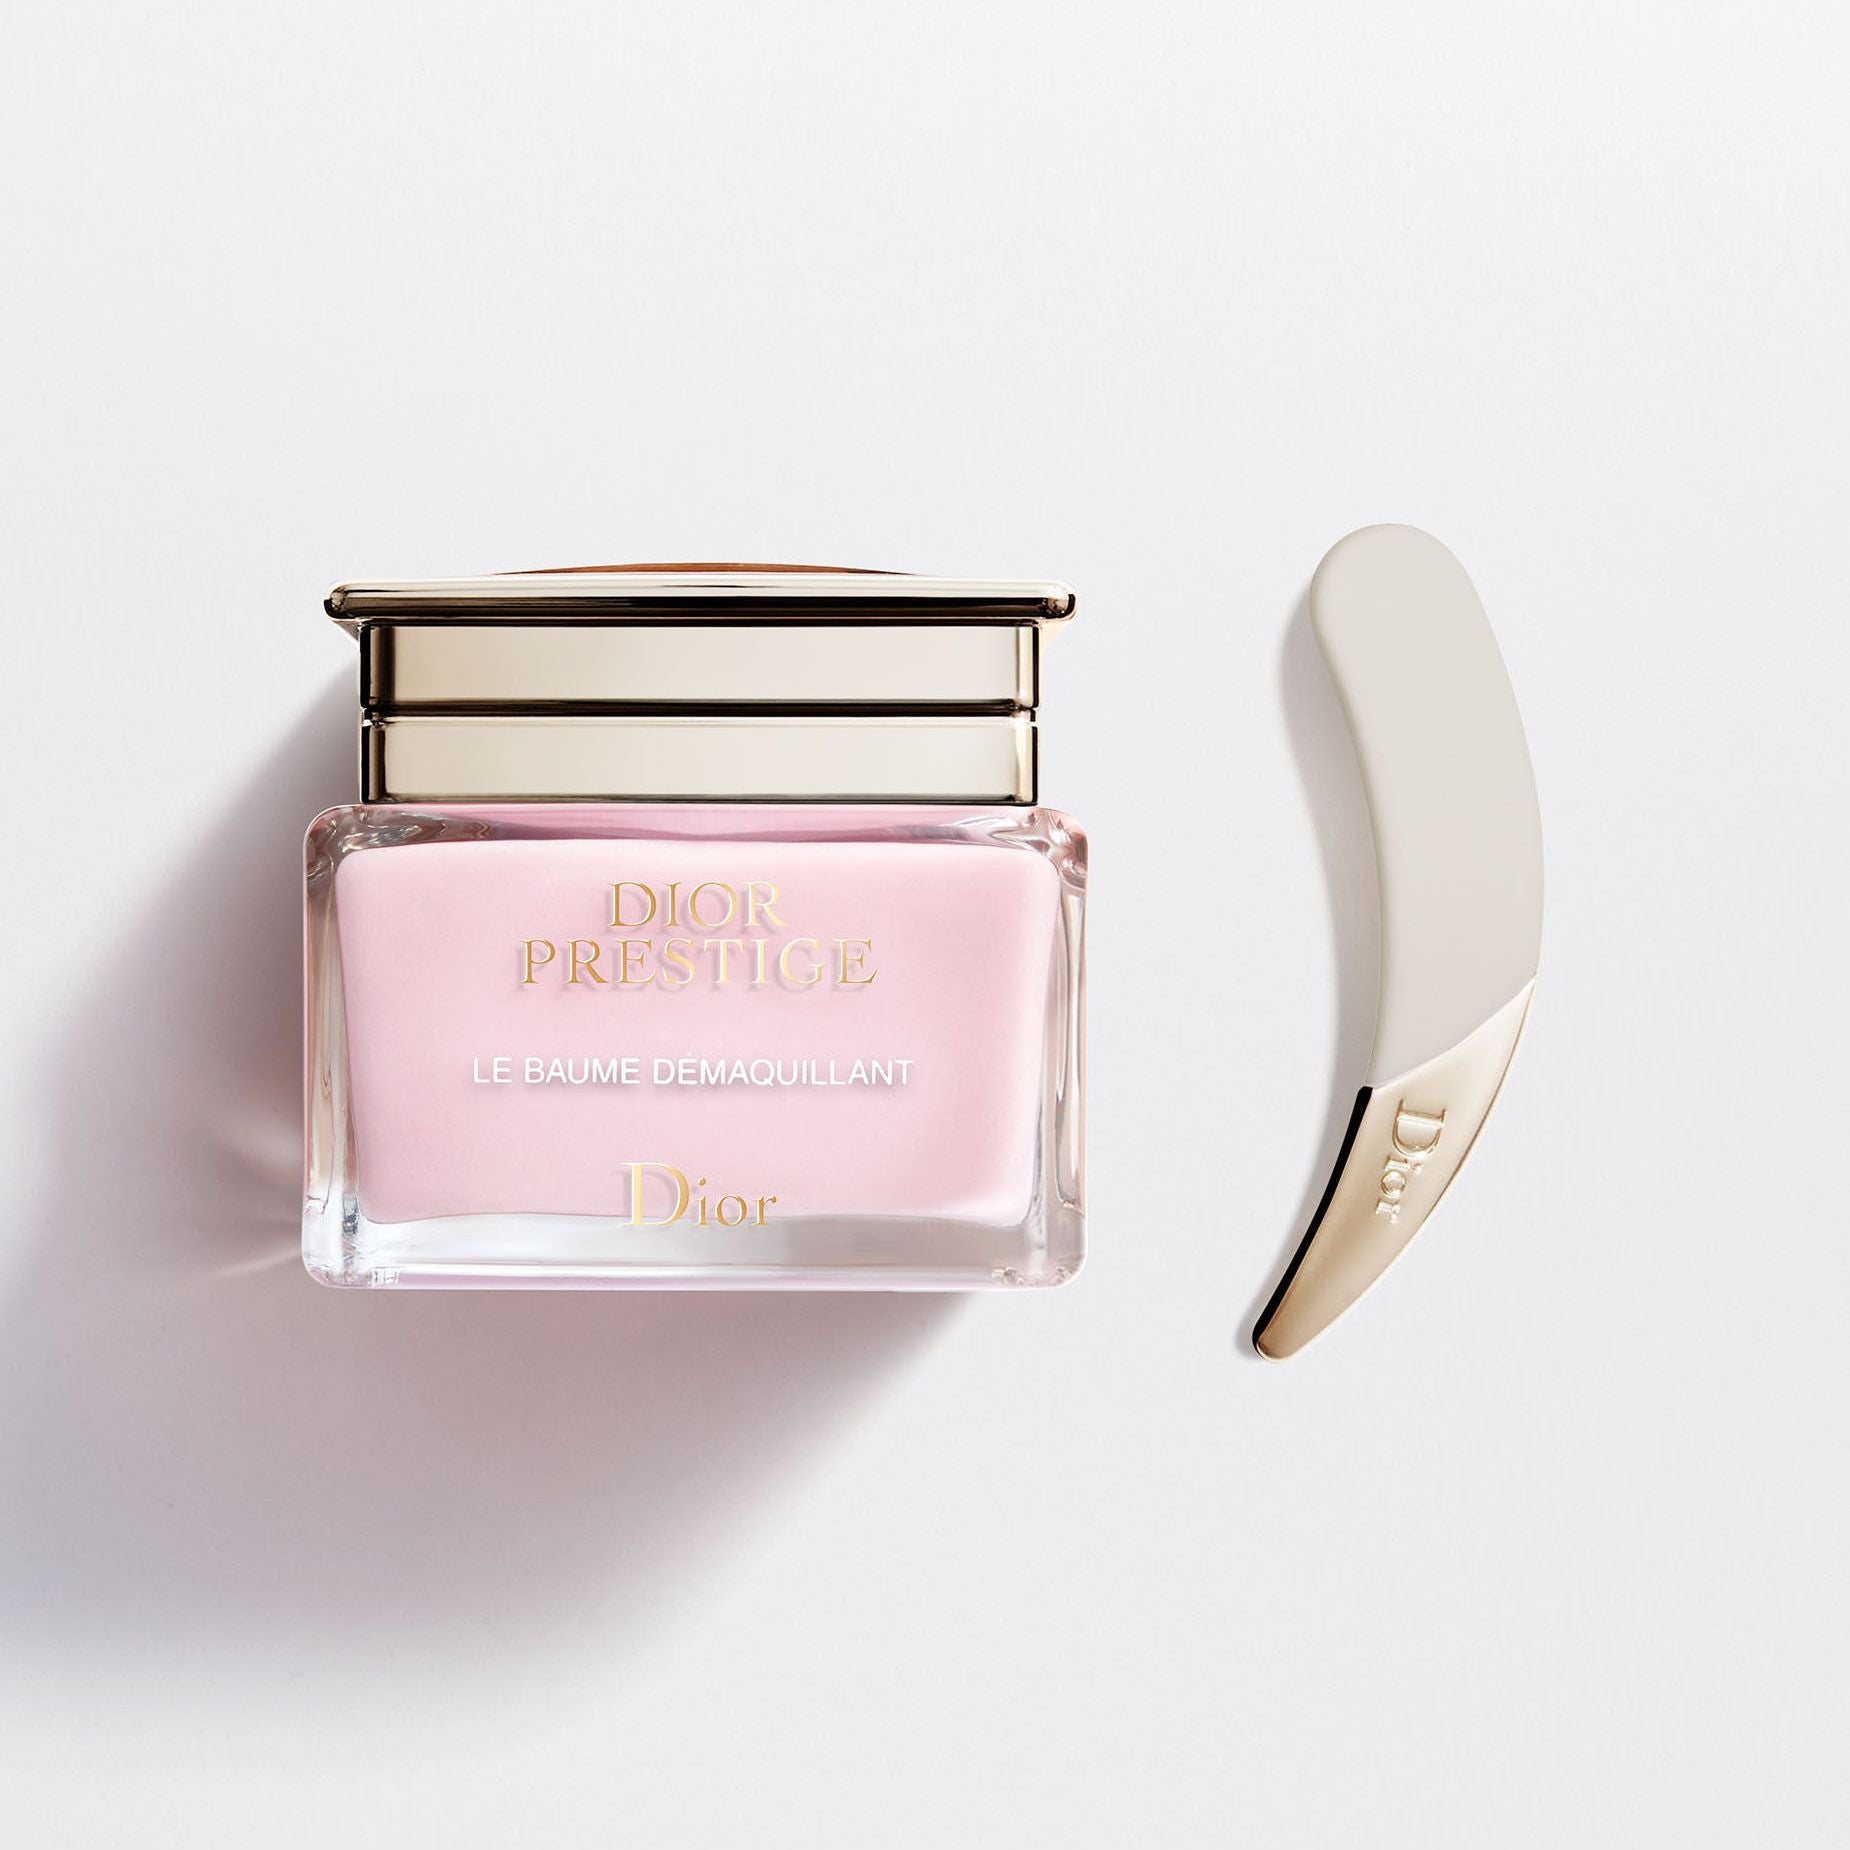 DIOR PRESTIGE LE BAUME DÉMAQUILLANT ~ Exceptional cleansing balm-to-oil